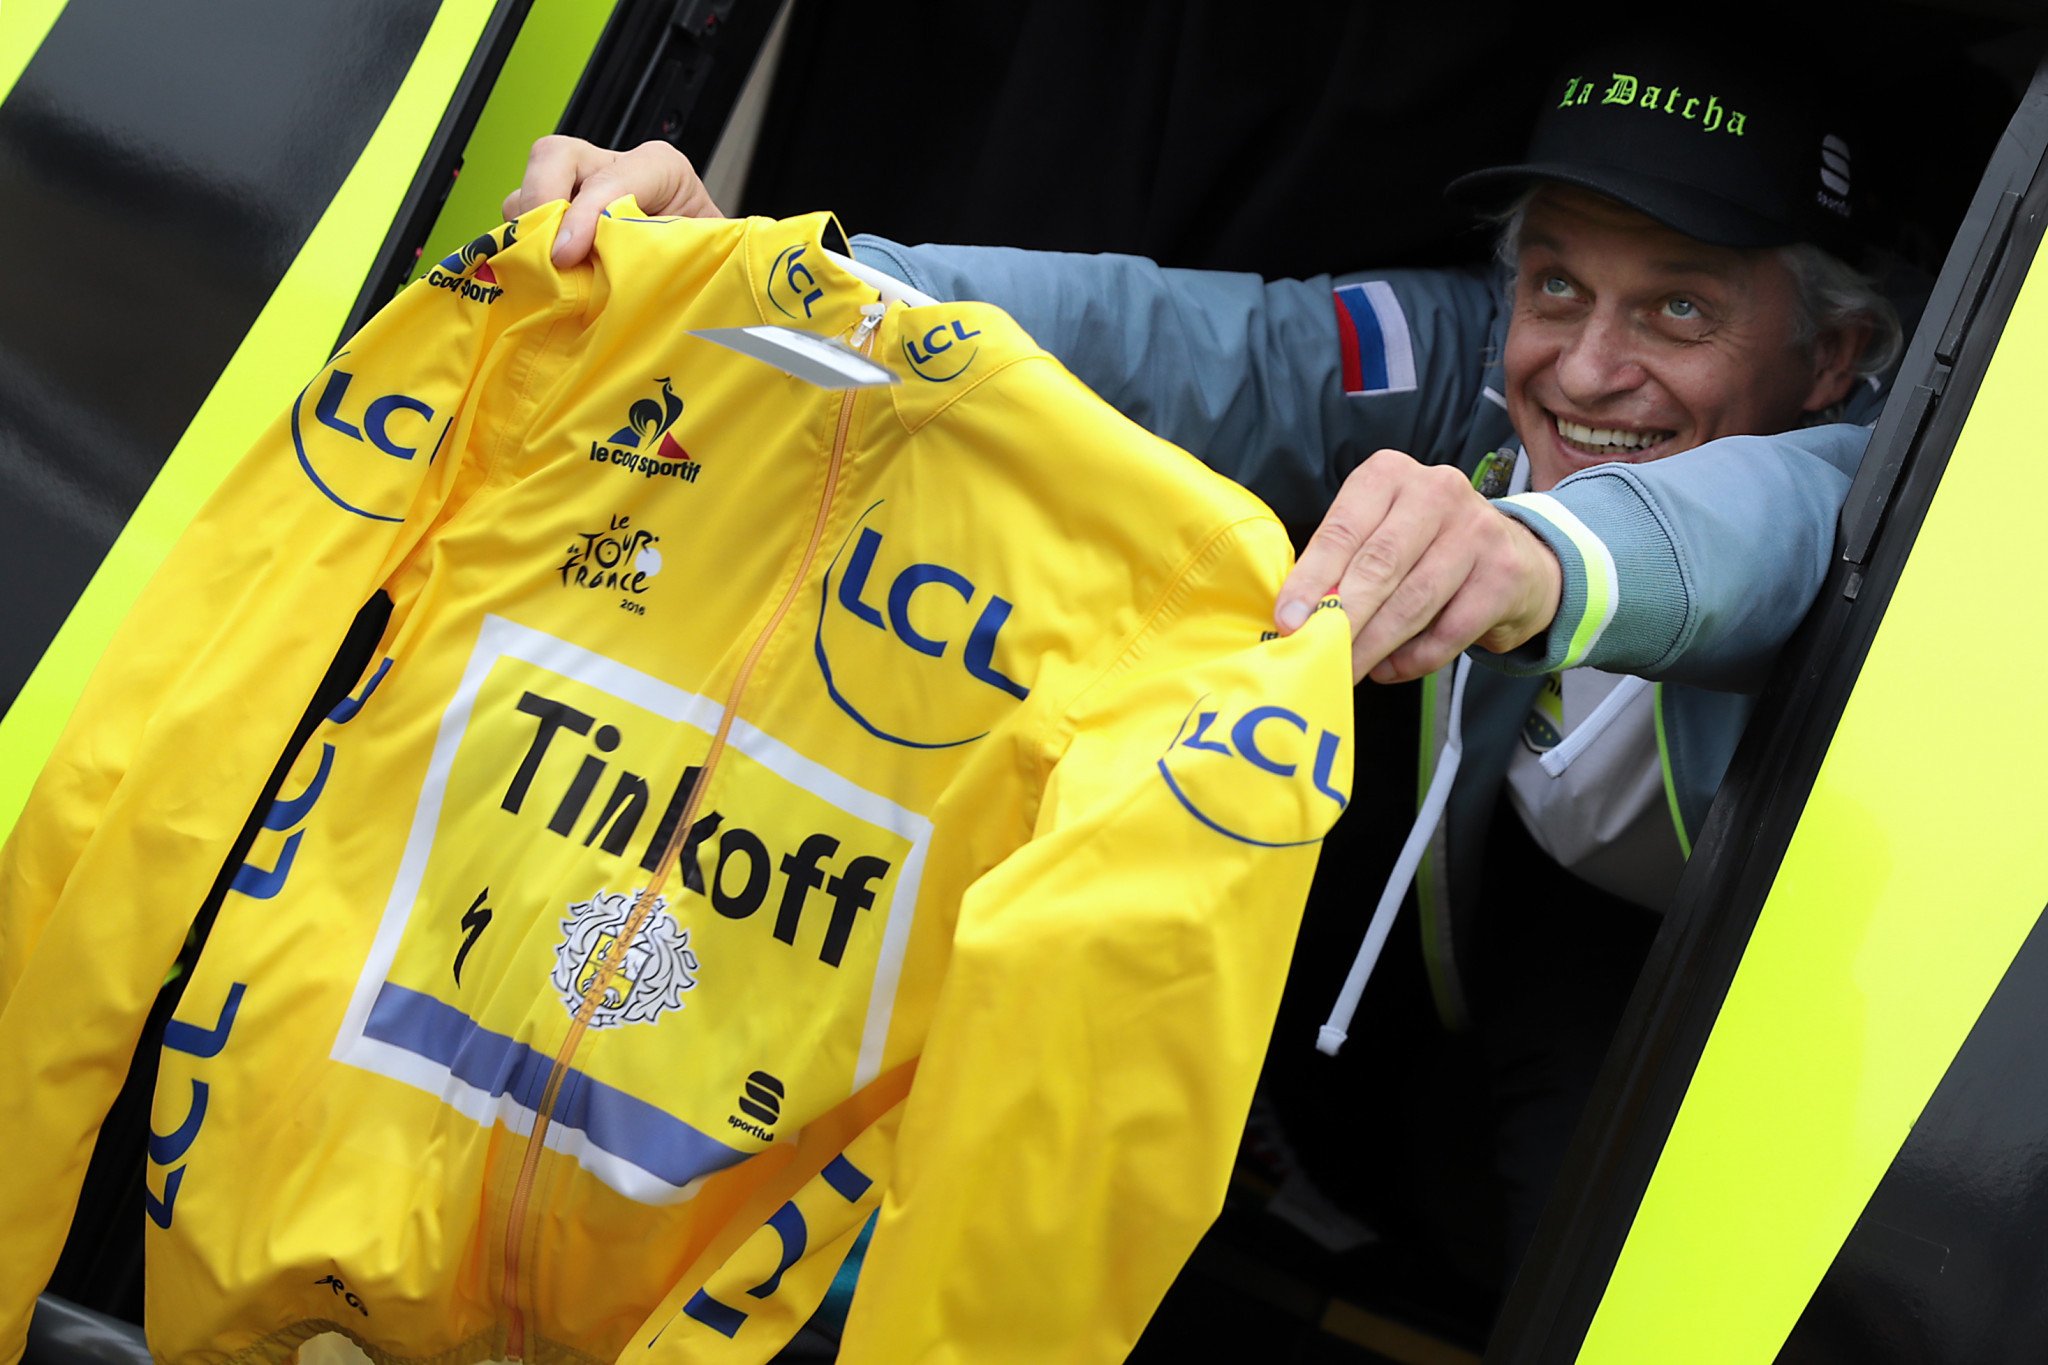 Oleg Tinkov owned a UCI WorldTour team until 2016 ©Getty Images